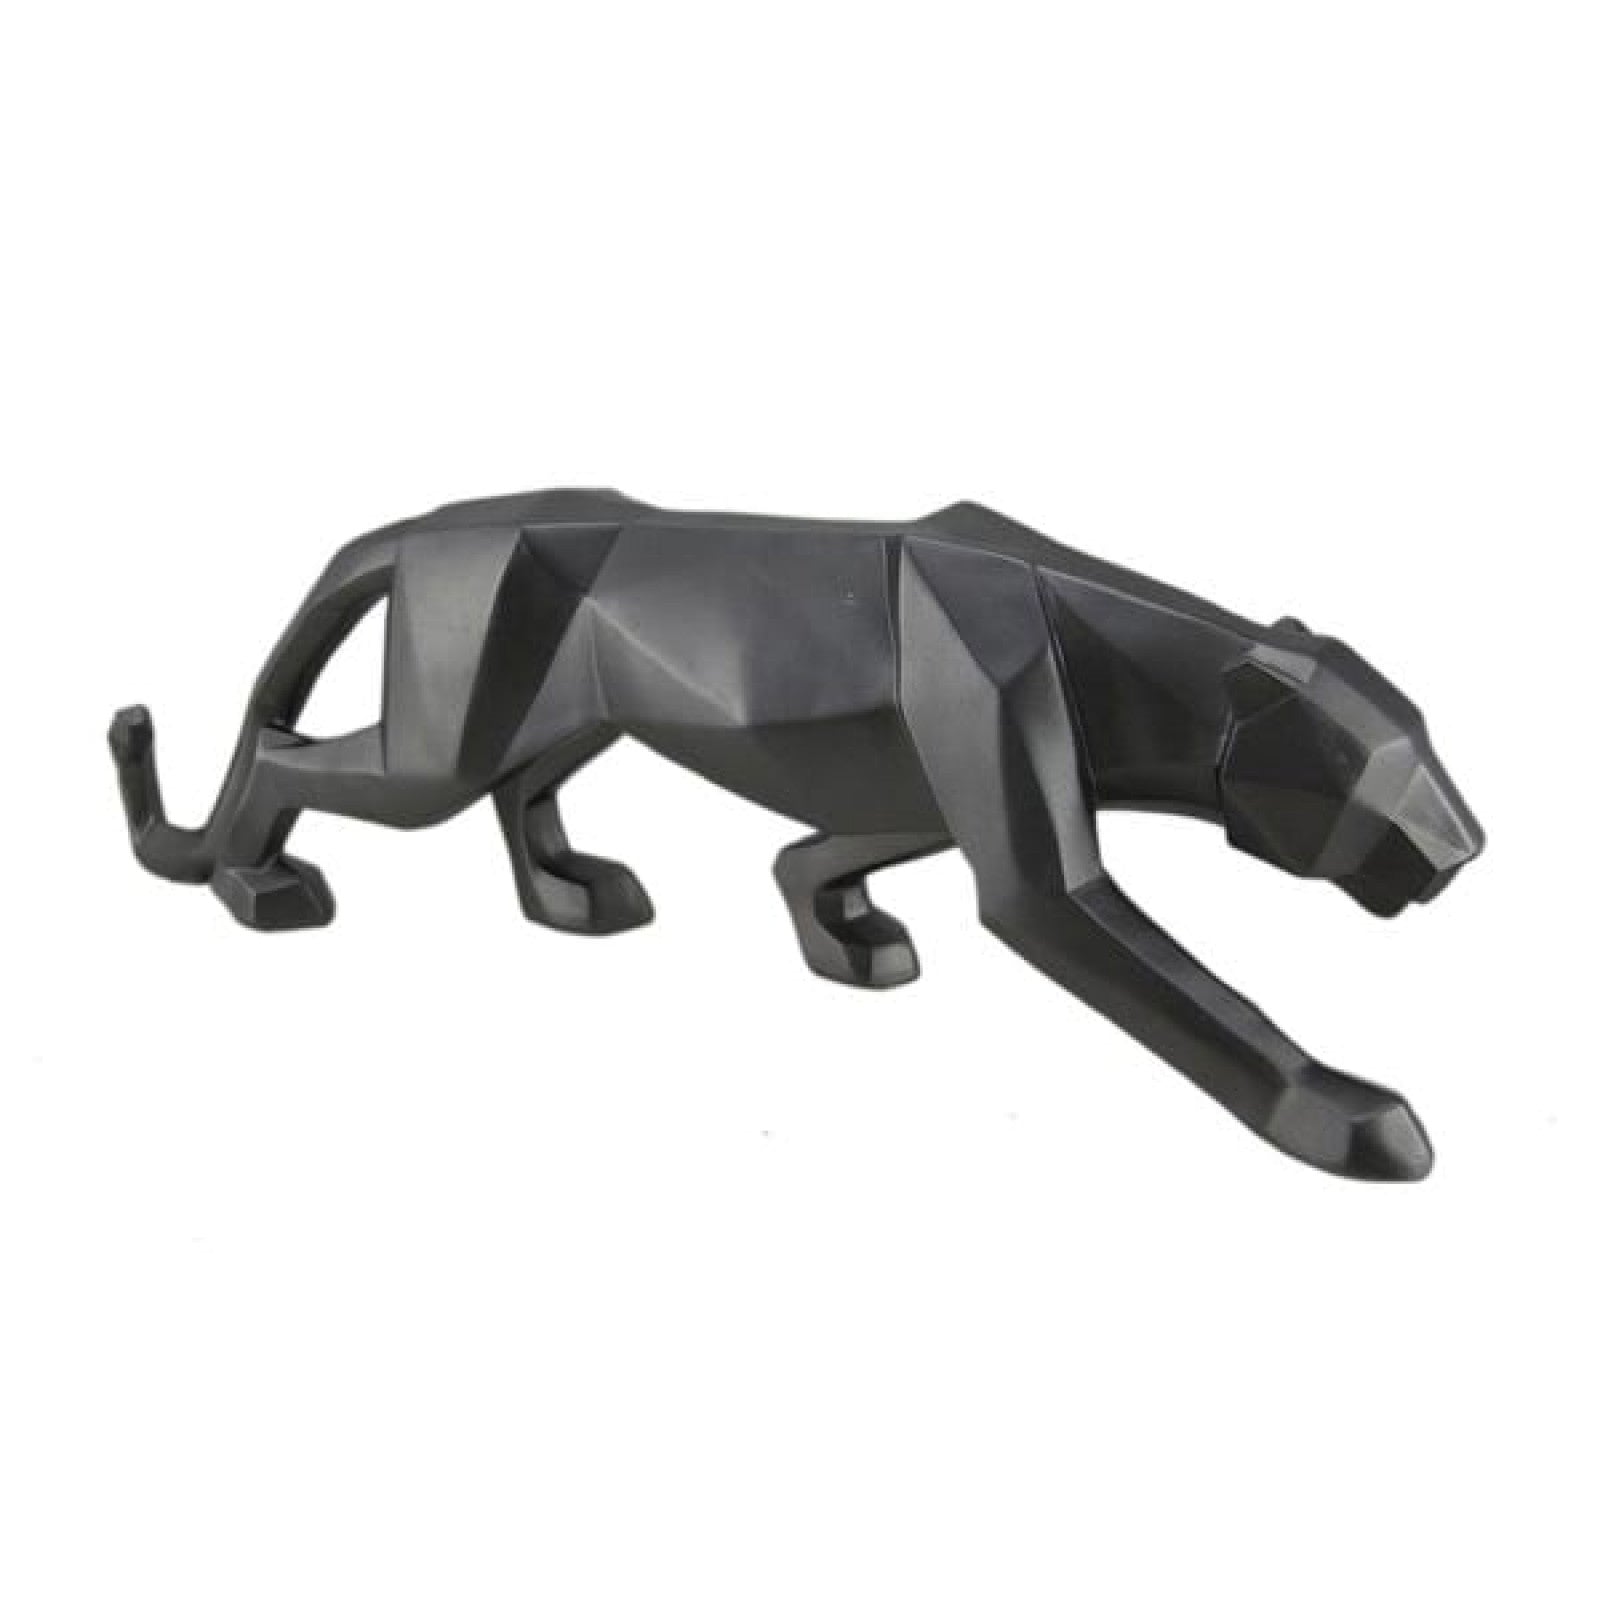 Panther - Origami - Davis Concept Store